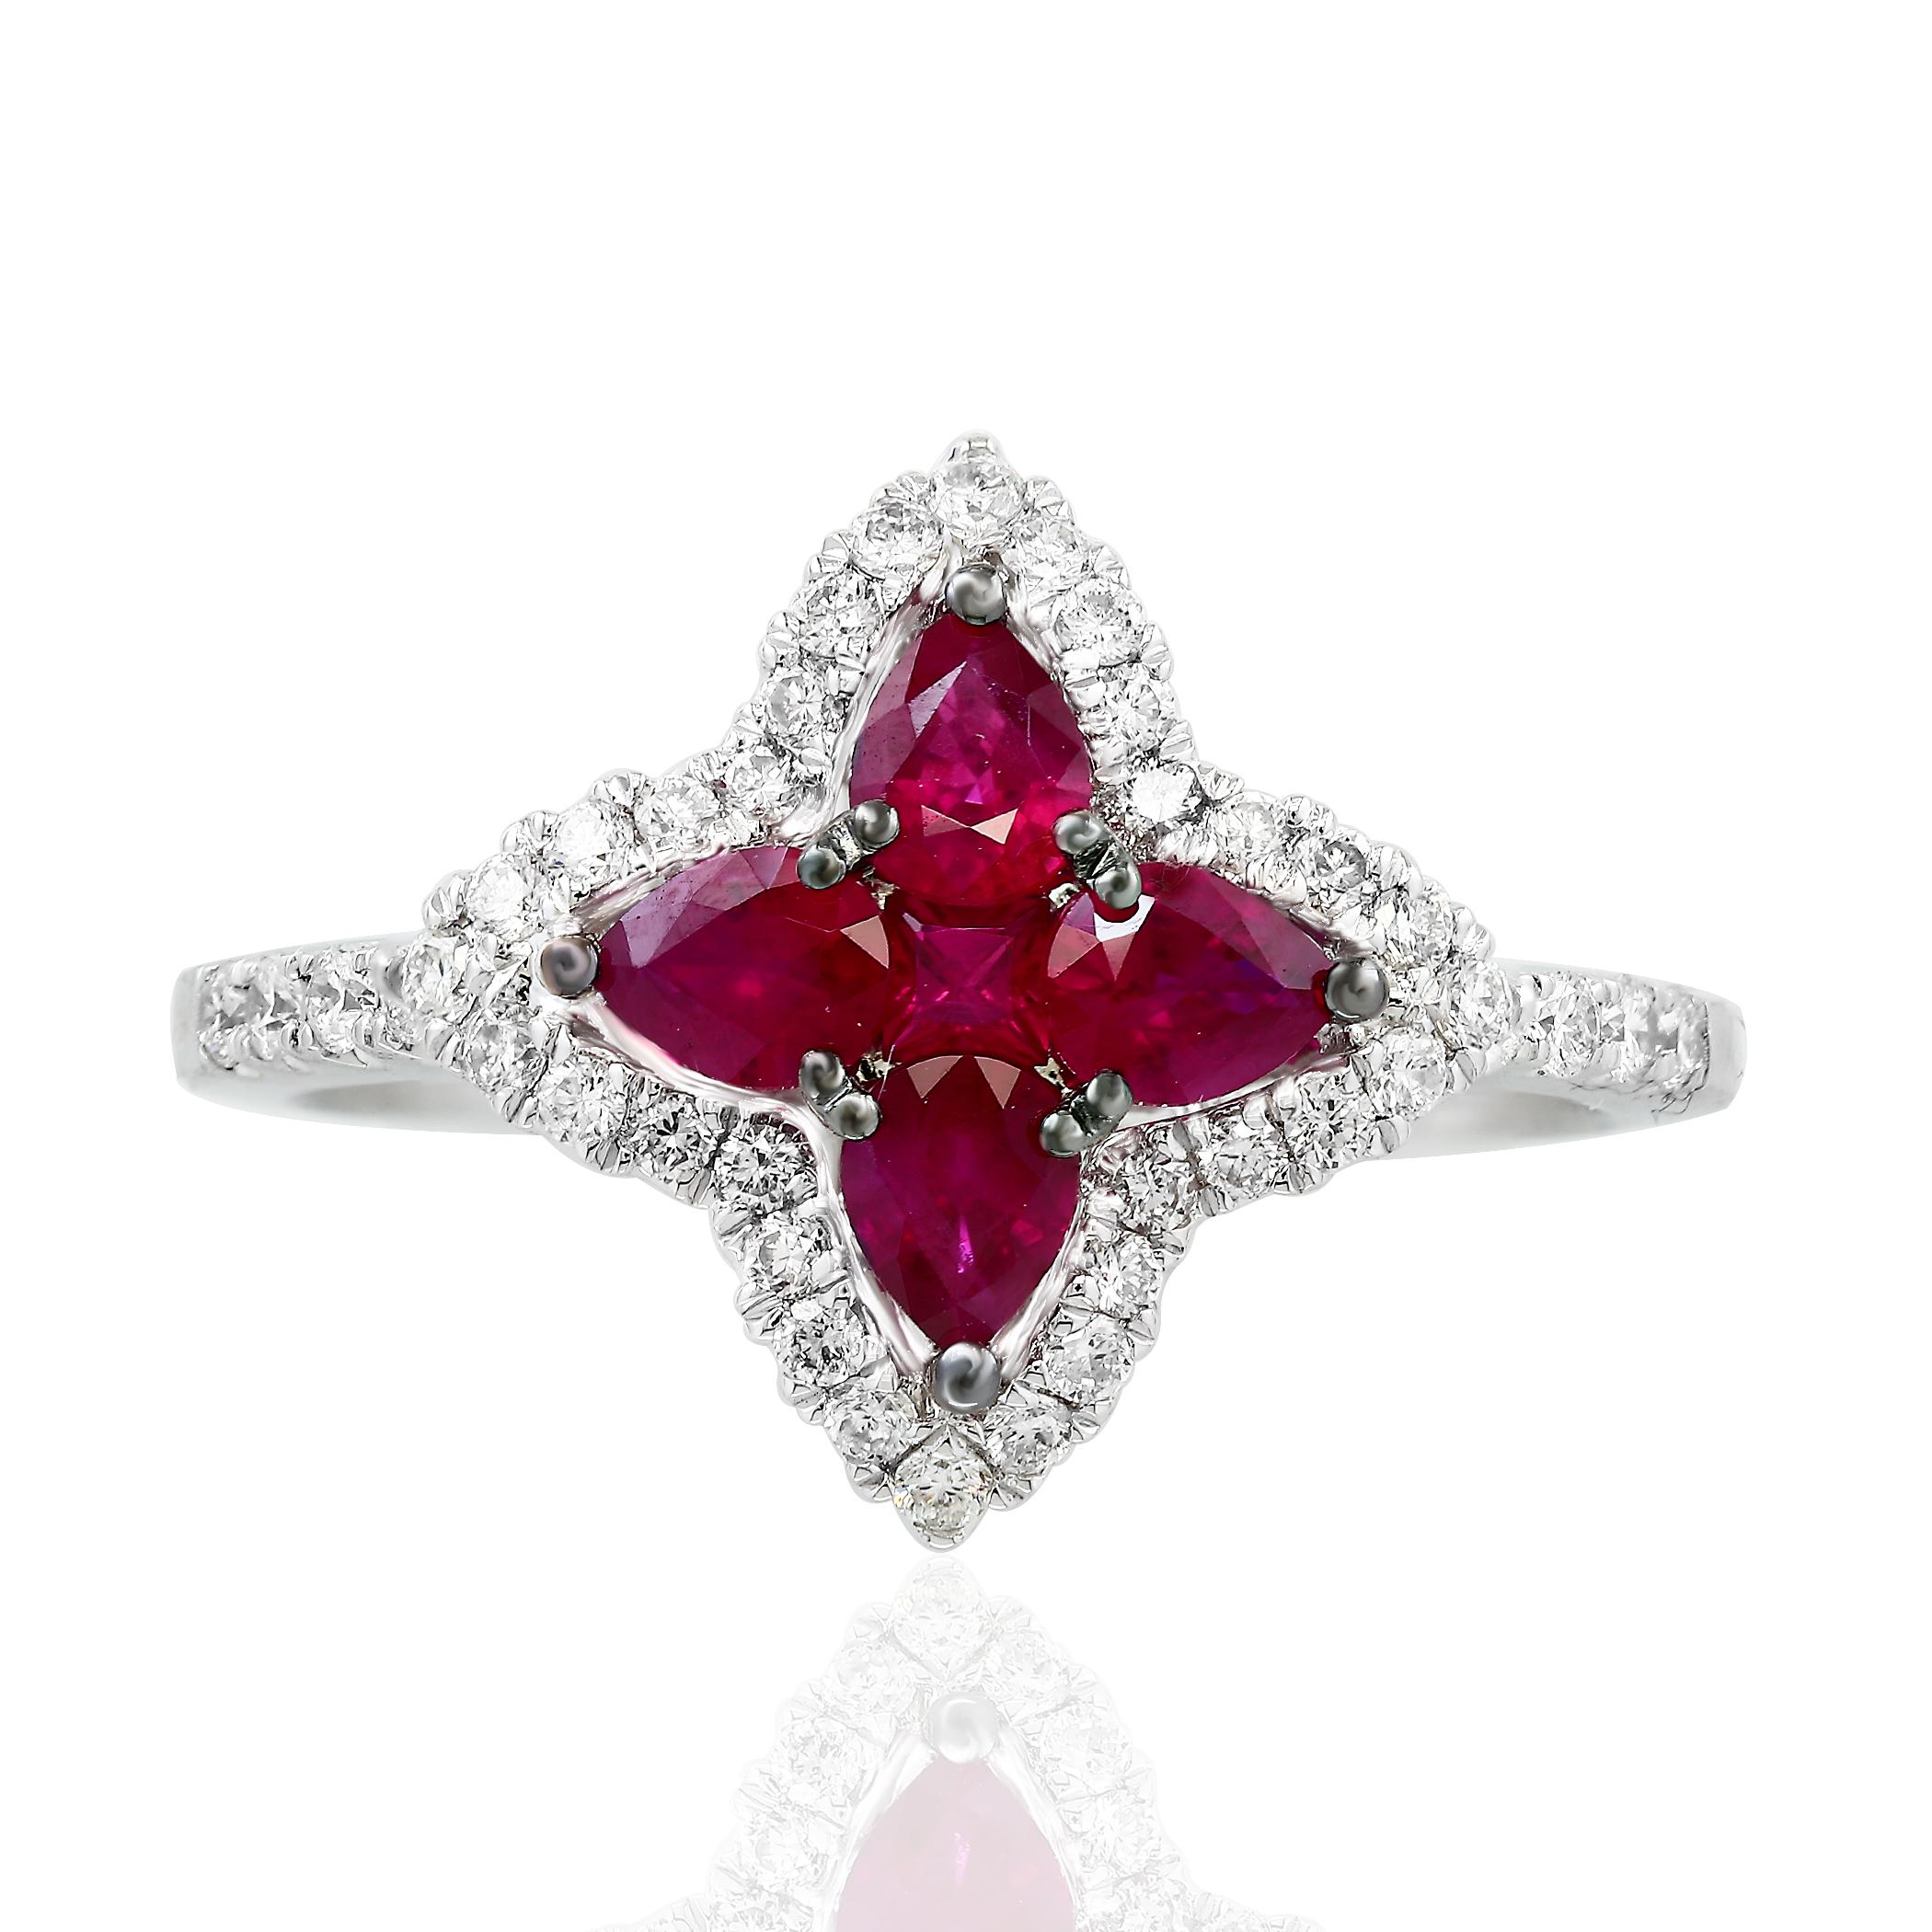 Showcasing flower design color-rich ring with 4 pear shape ruby weighing 0.70 carats total and 1 round shape ruby weighing 0.06 carat, accented by a row of round brilliant diamonds. Diamonds weigh 0.35 carats total. Set in a polished 18K white gold